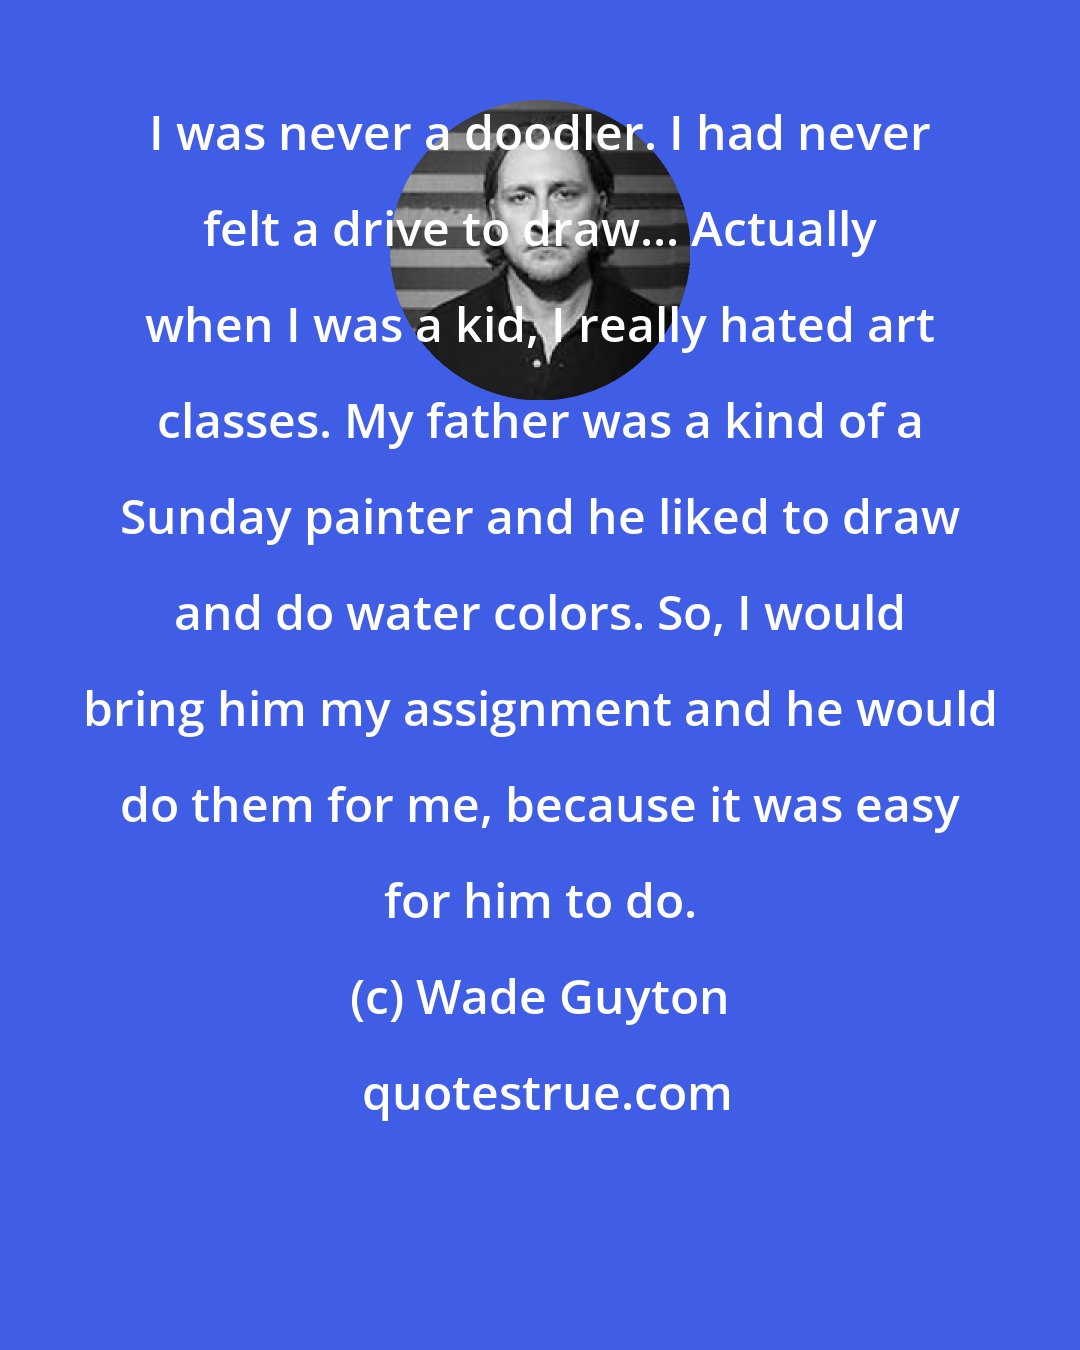 Wade Guyton: I was never a doodler. I had never felt a drive to draw... Actually when I was a kid, I really hated art classes. My father was a kind of a Sunday painter and he liked to draw and do water colors. So, I would bring him my assignment and he would do them for me, because it was easy for him to do.